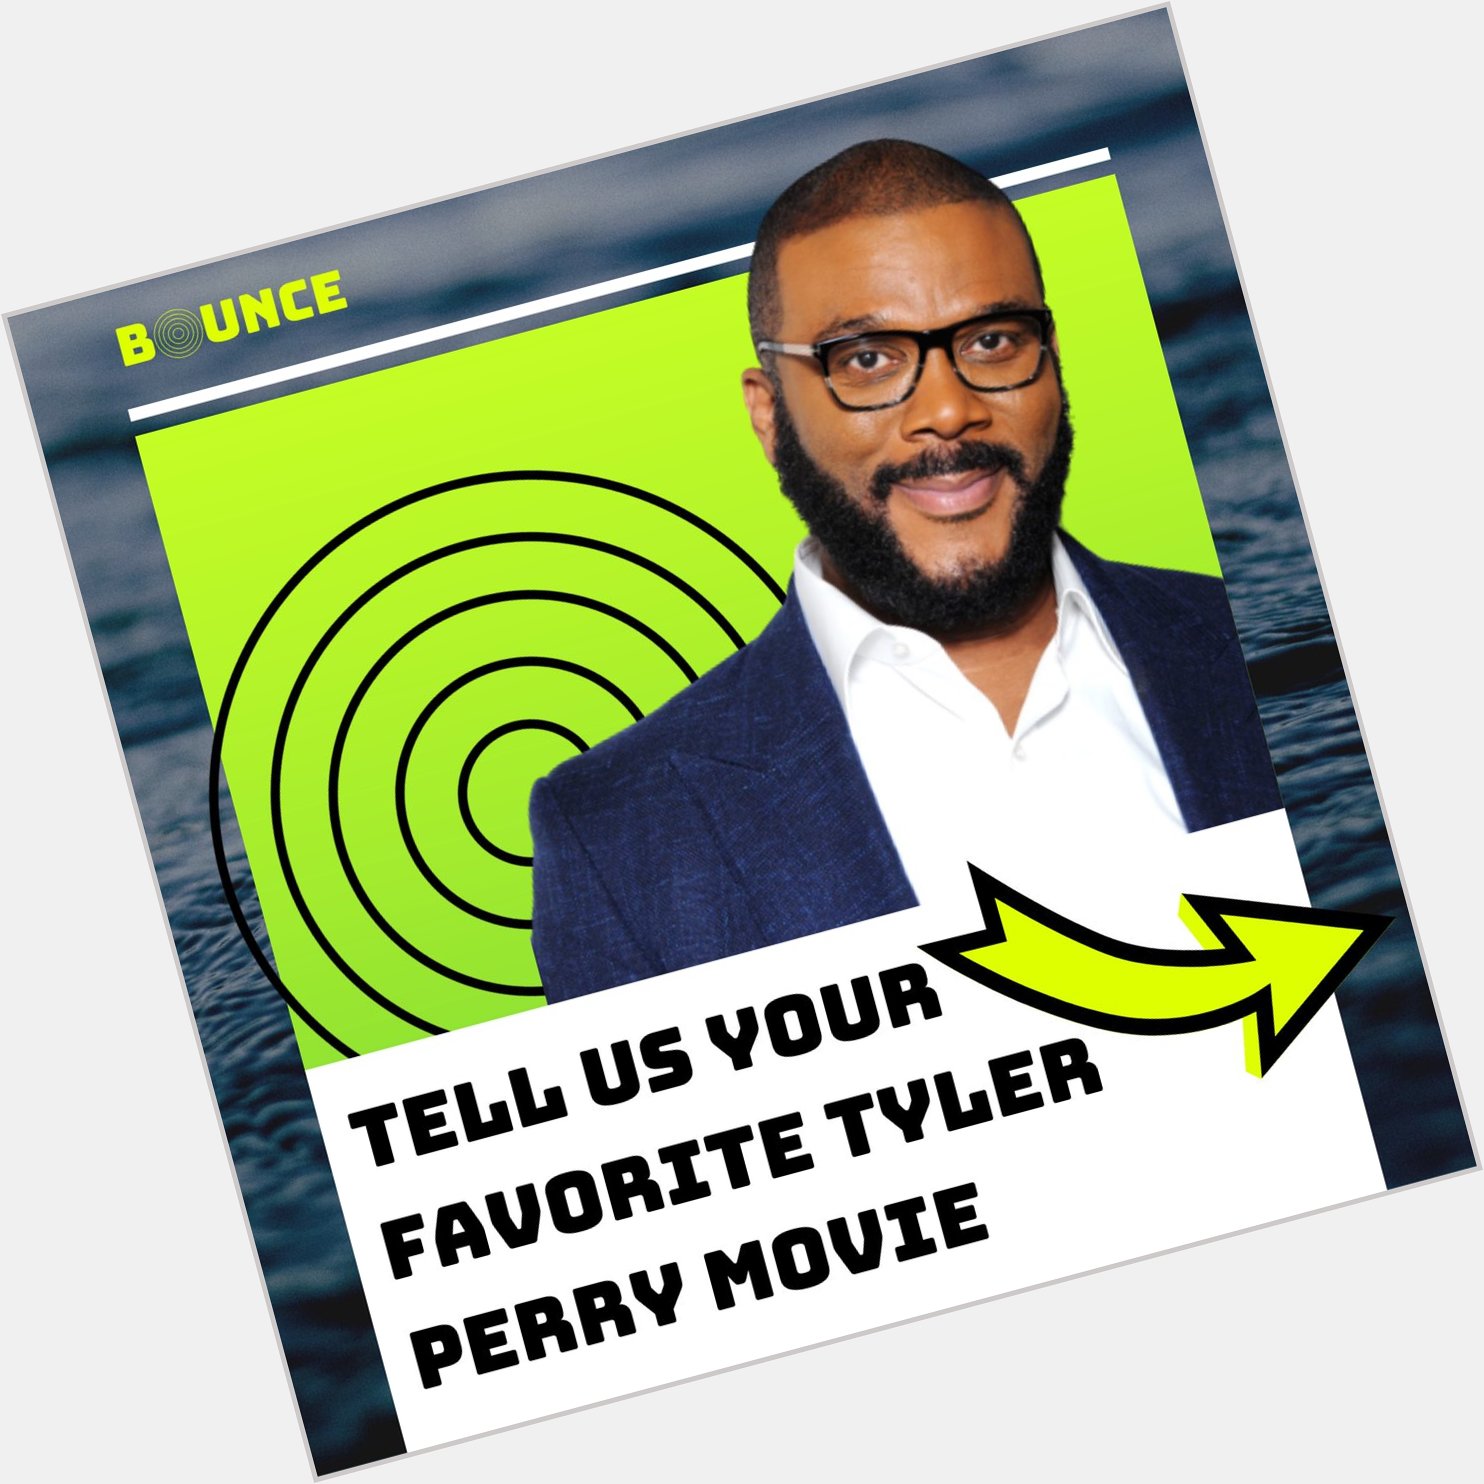 Happy birthday to legendary Tyler Perry. tell us what your favorite Tyler Perry movie is 